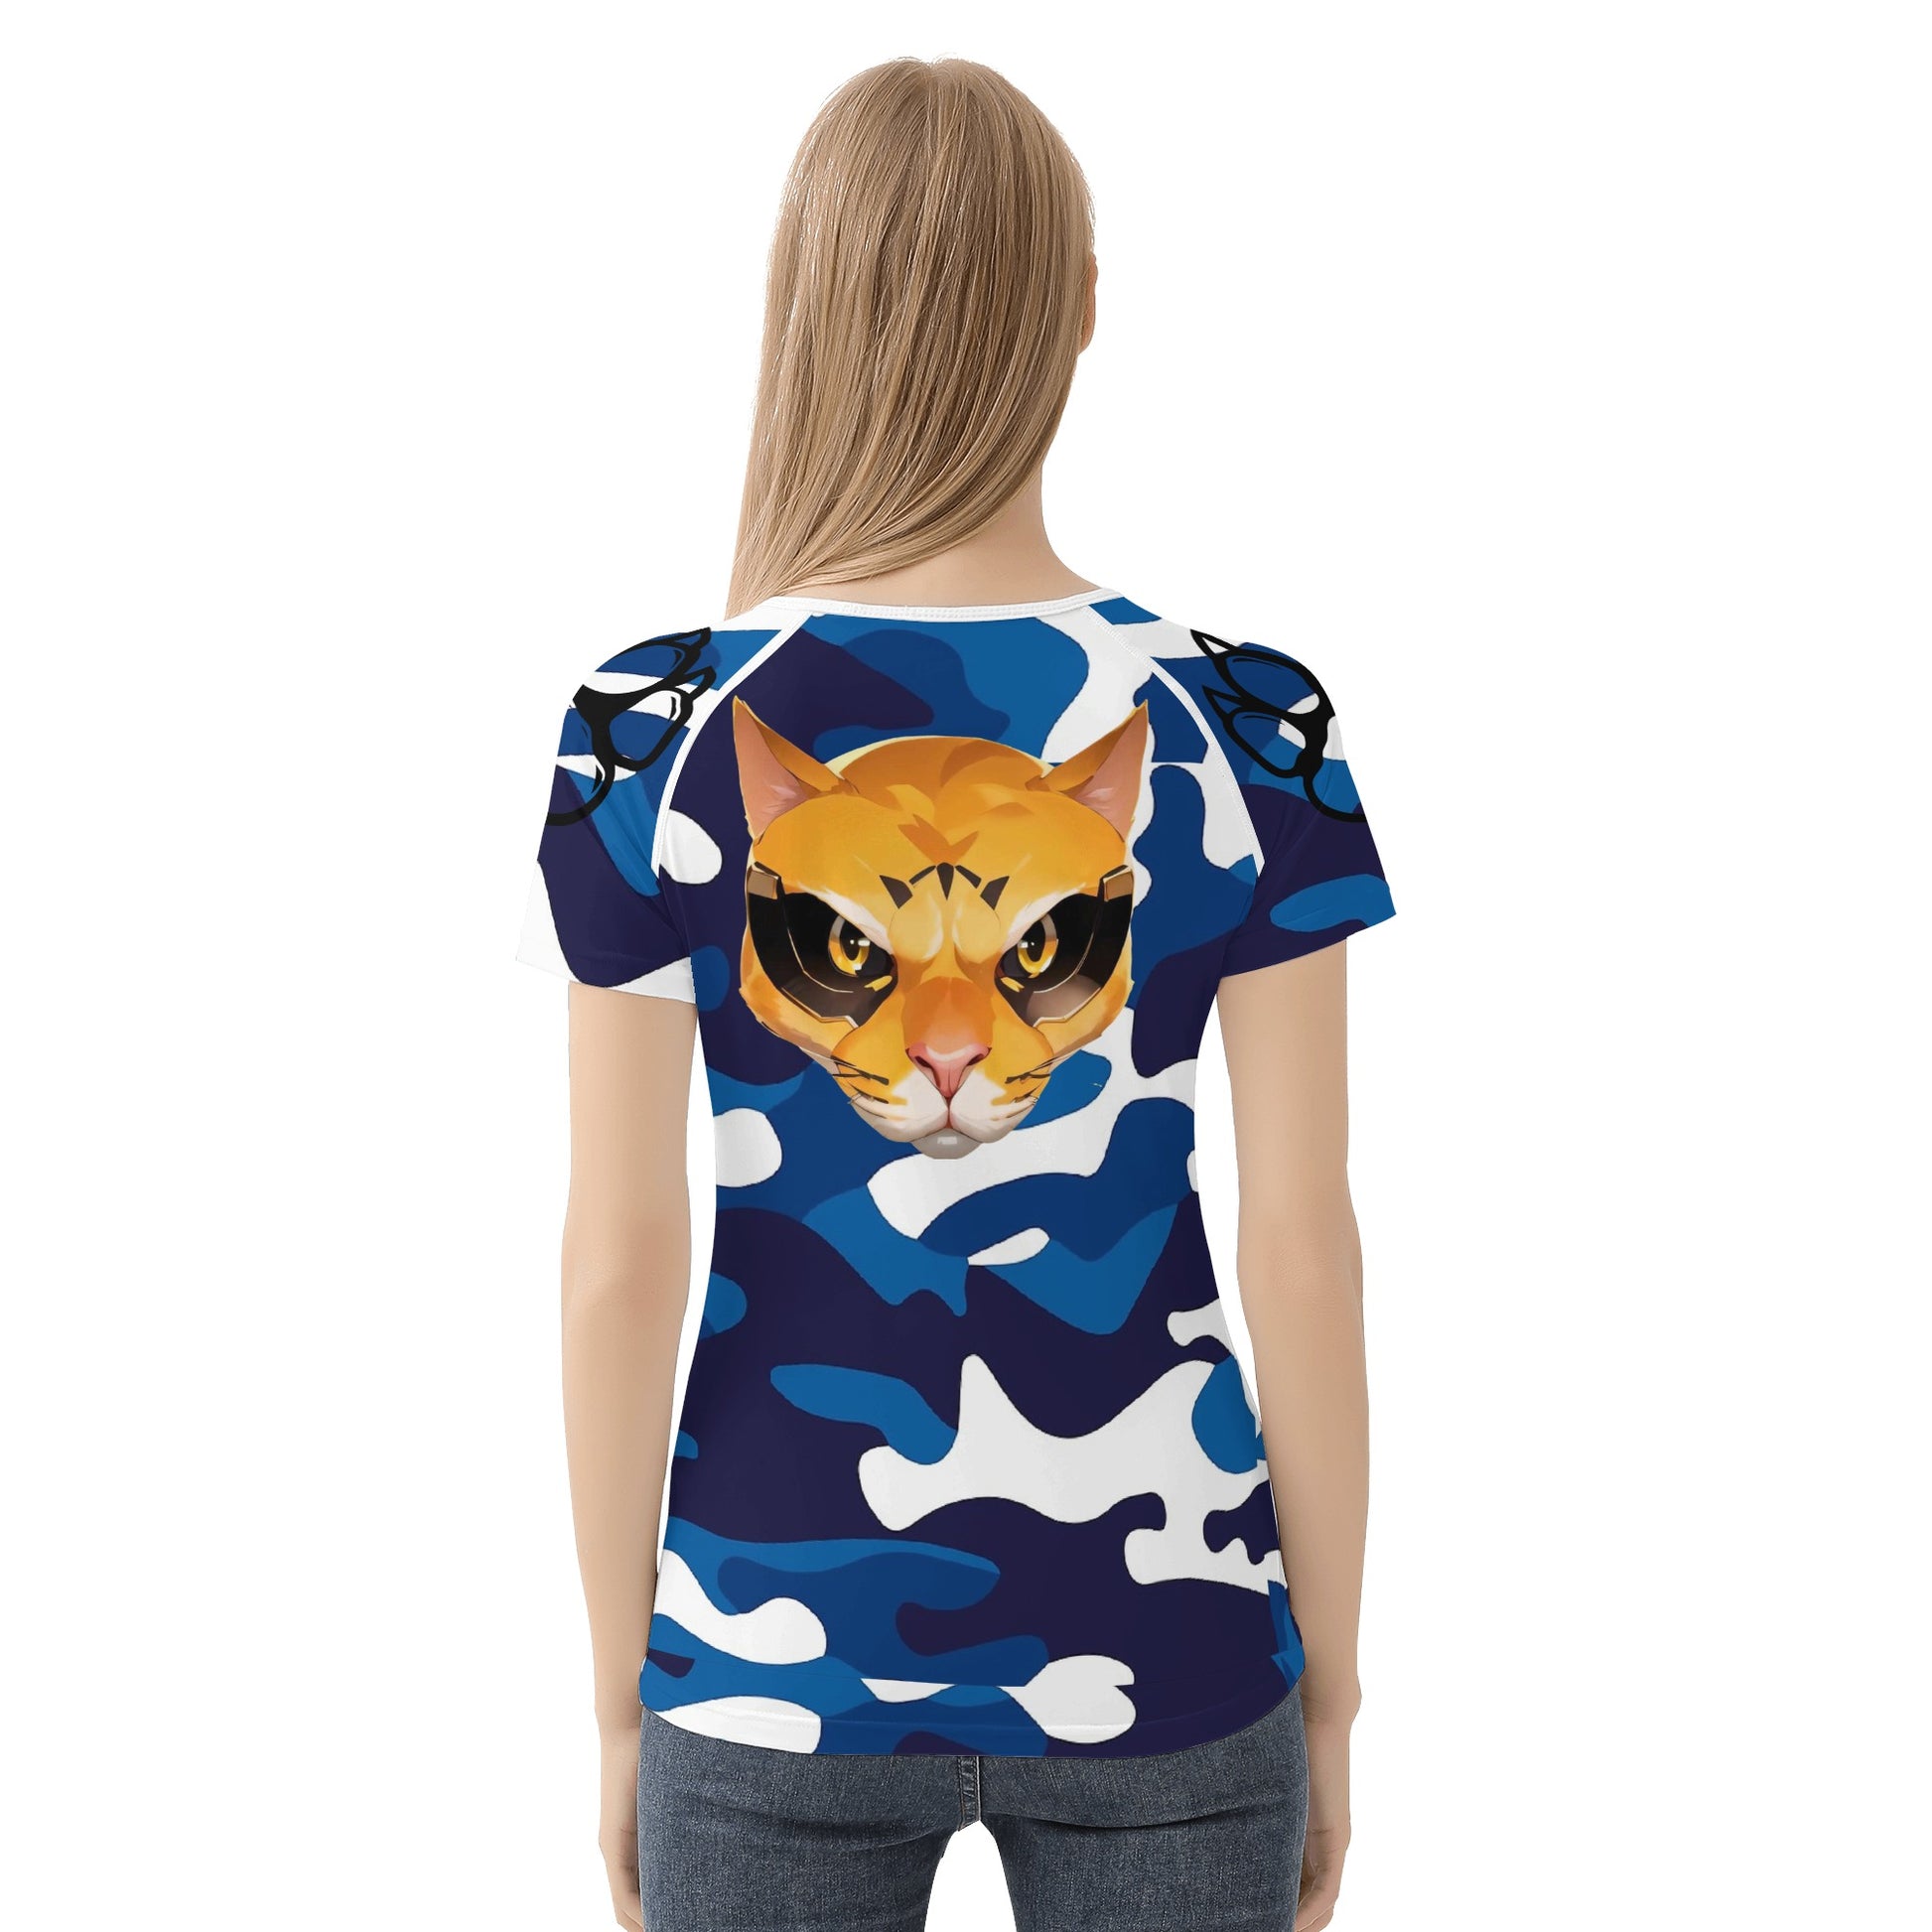 Stand out  with the  Nugget Army Police  Womens T shirt  available at Hey Nugget. Grab yours today!